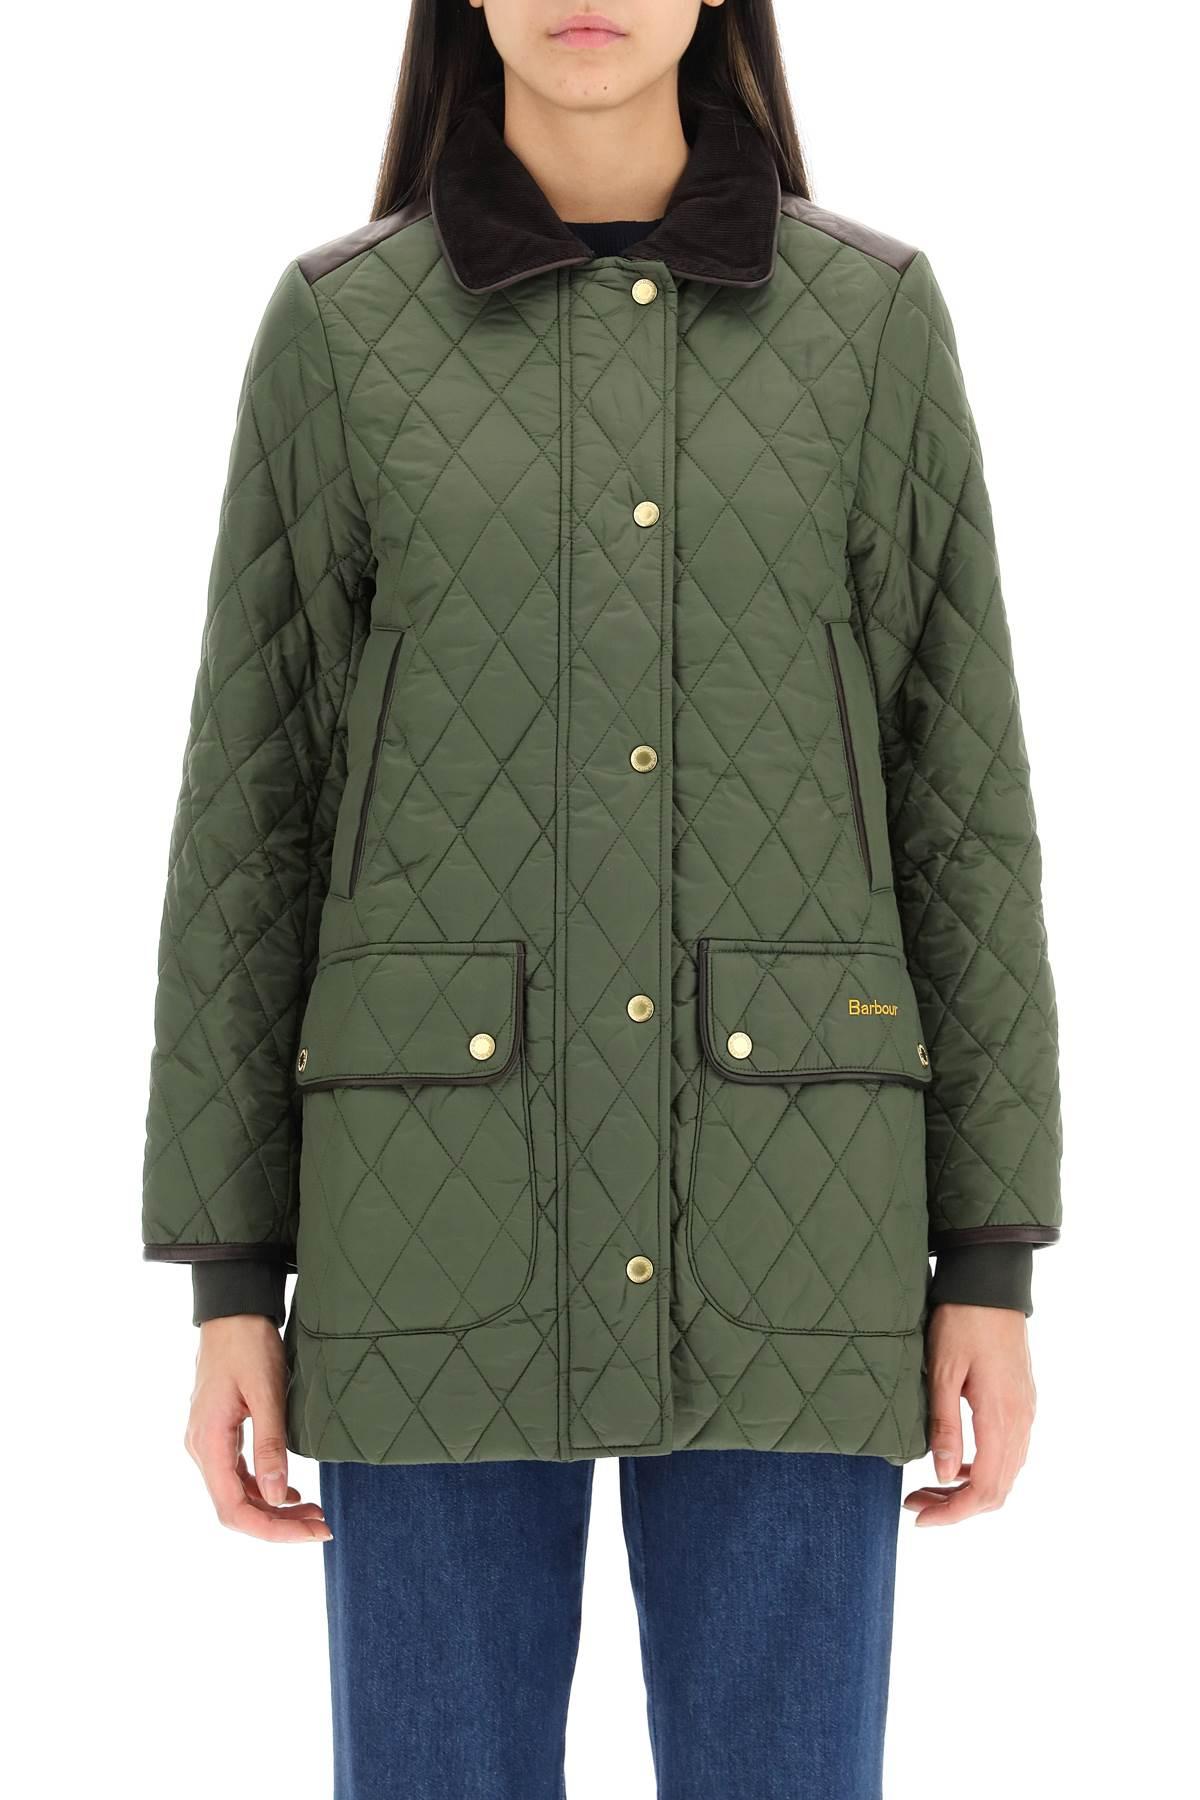 Barbour 'kilmarie' Quilted Jacket With Leather Inserts in Green | Lyst